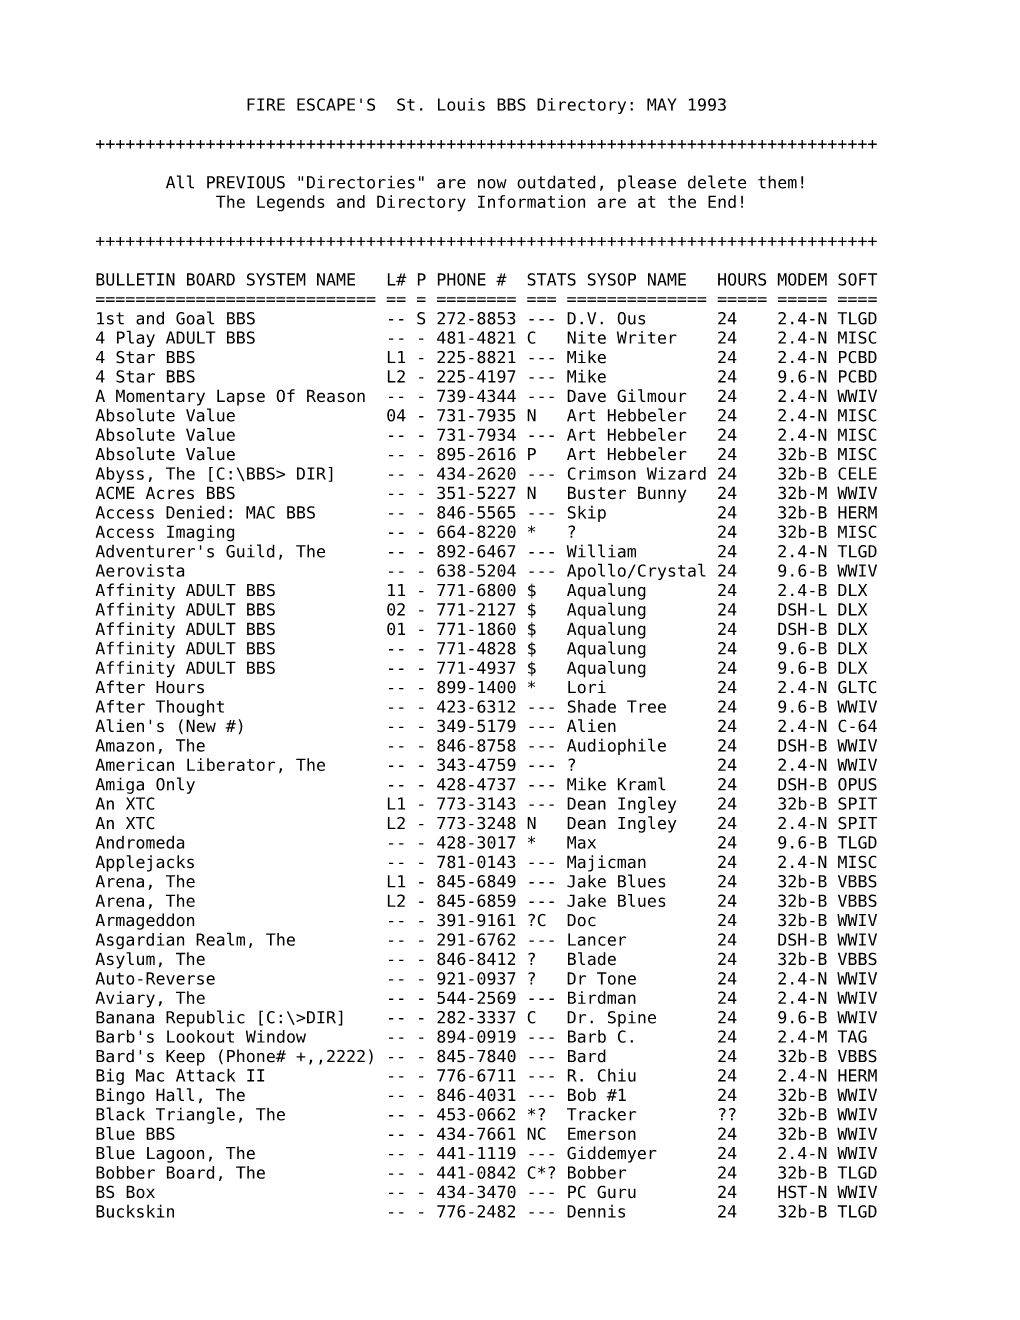 FIRE ESCAPE's St. Louis BBS Directory: MAY 1993 +++++++++++